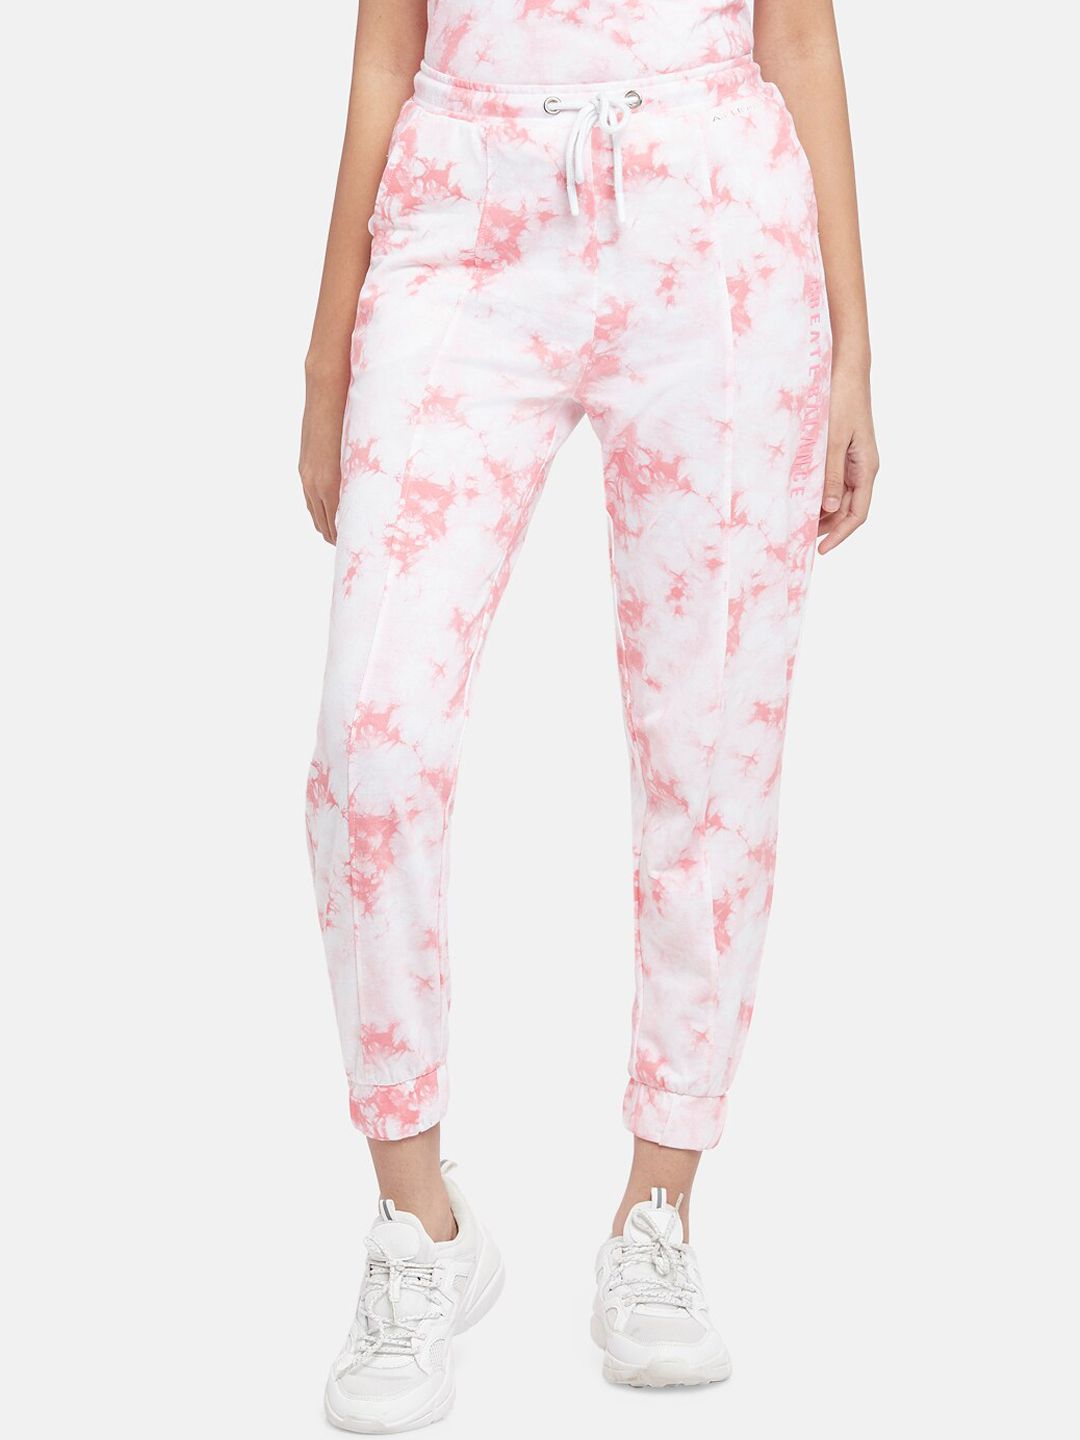 Ajile by Pantaloons Women Pink & White Tie-Dye Printed High-Rise Joggers Price in India